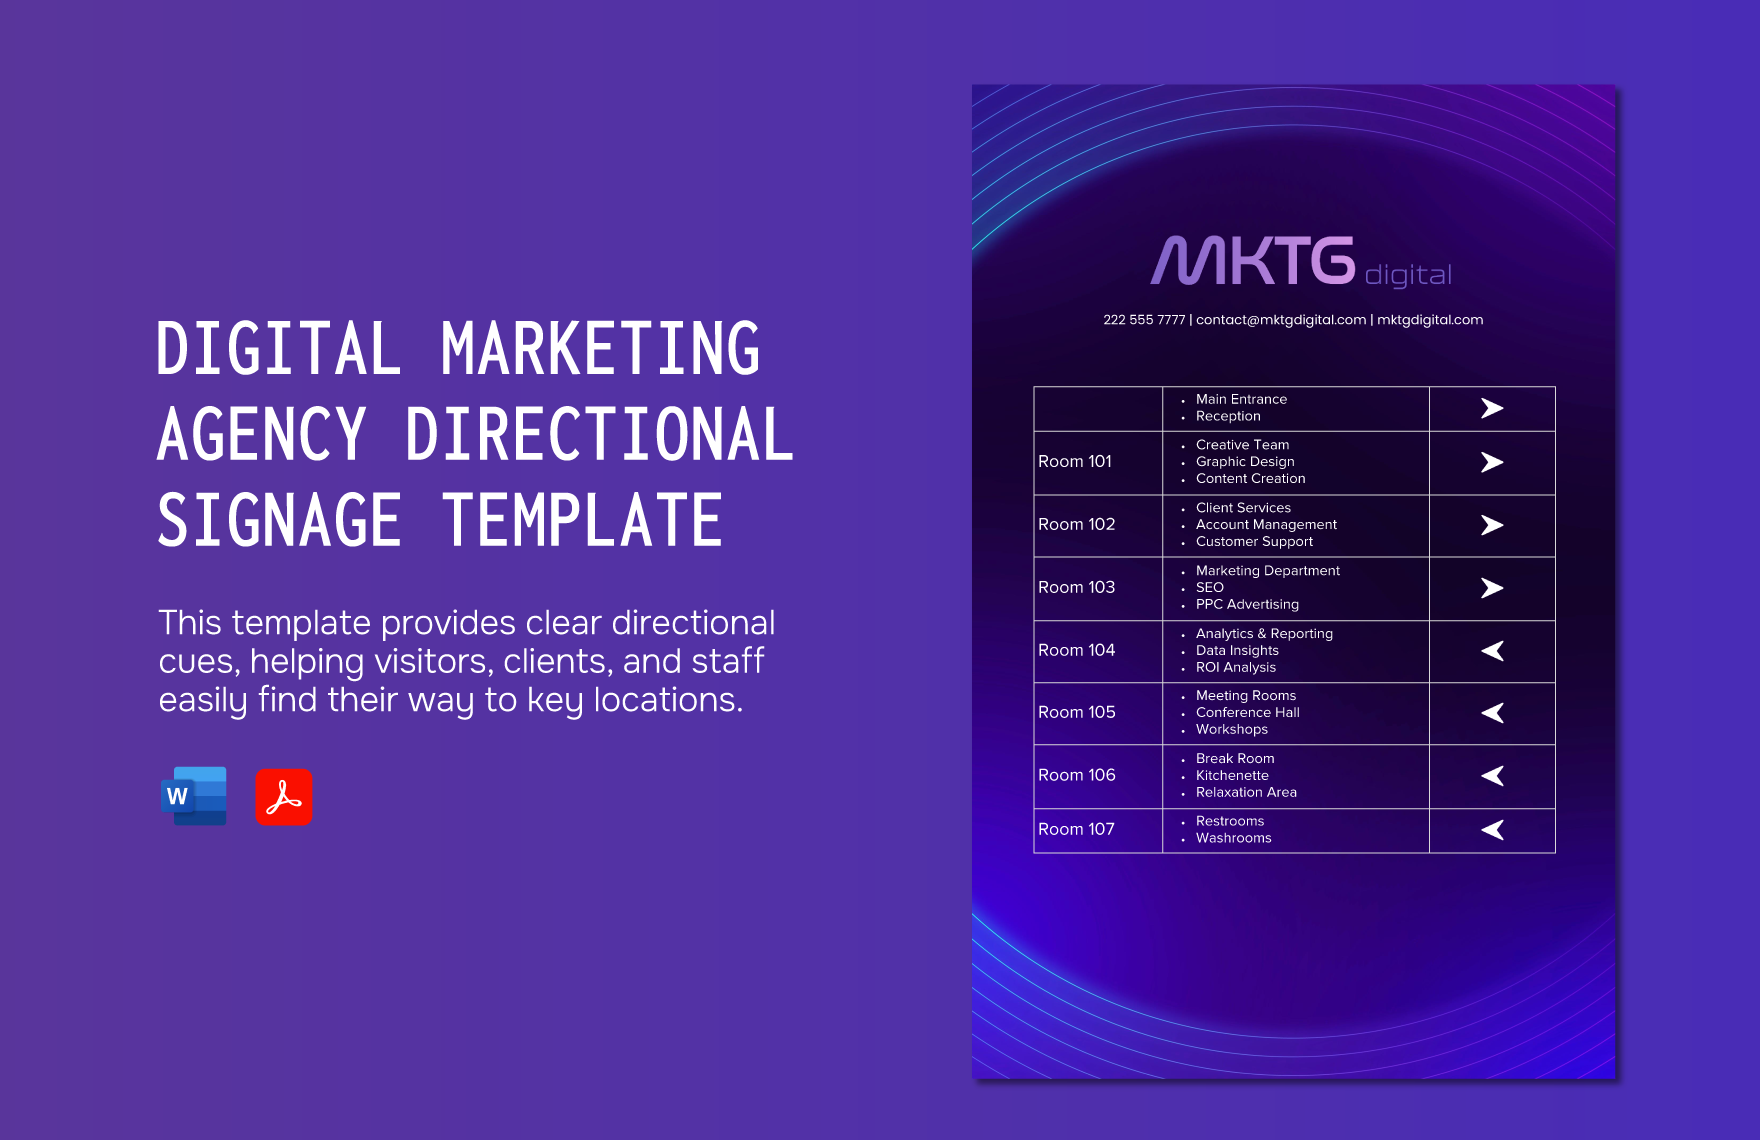 Digital Marketing Agency Directional Signage Template